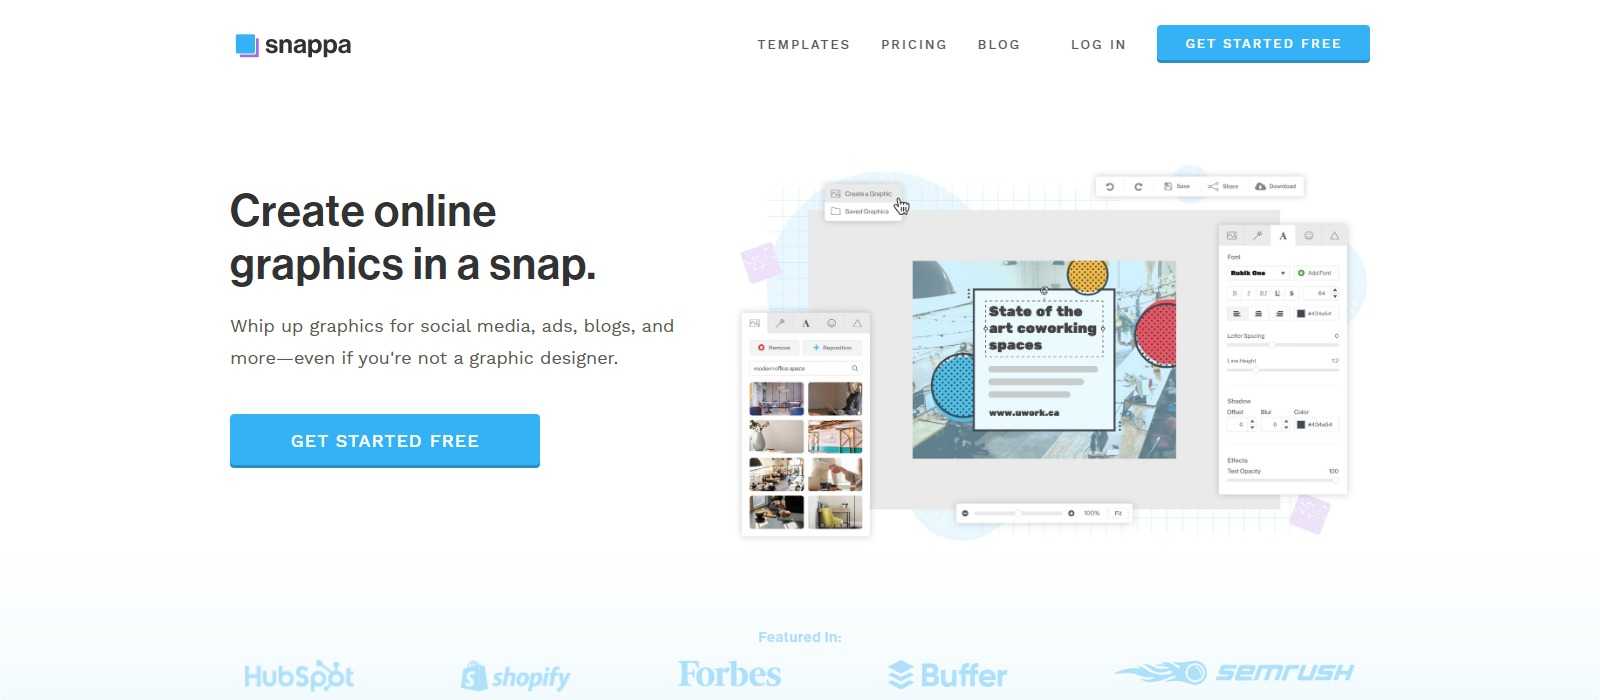 Snappa.com Affiliates Program Review: Earn 40% Recurring Commissions as a Snappa Affiliate